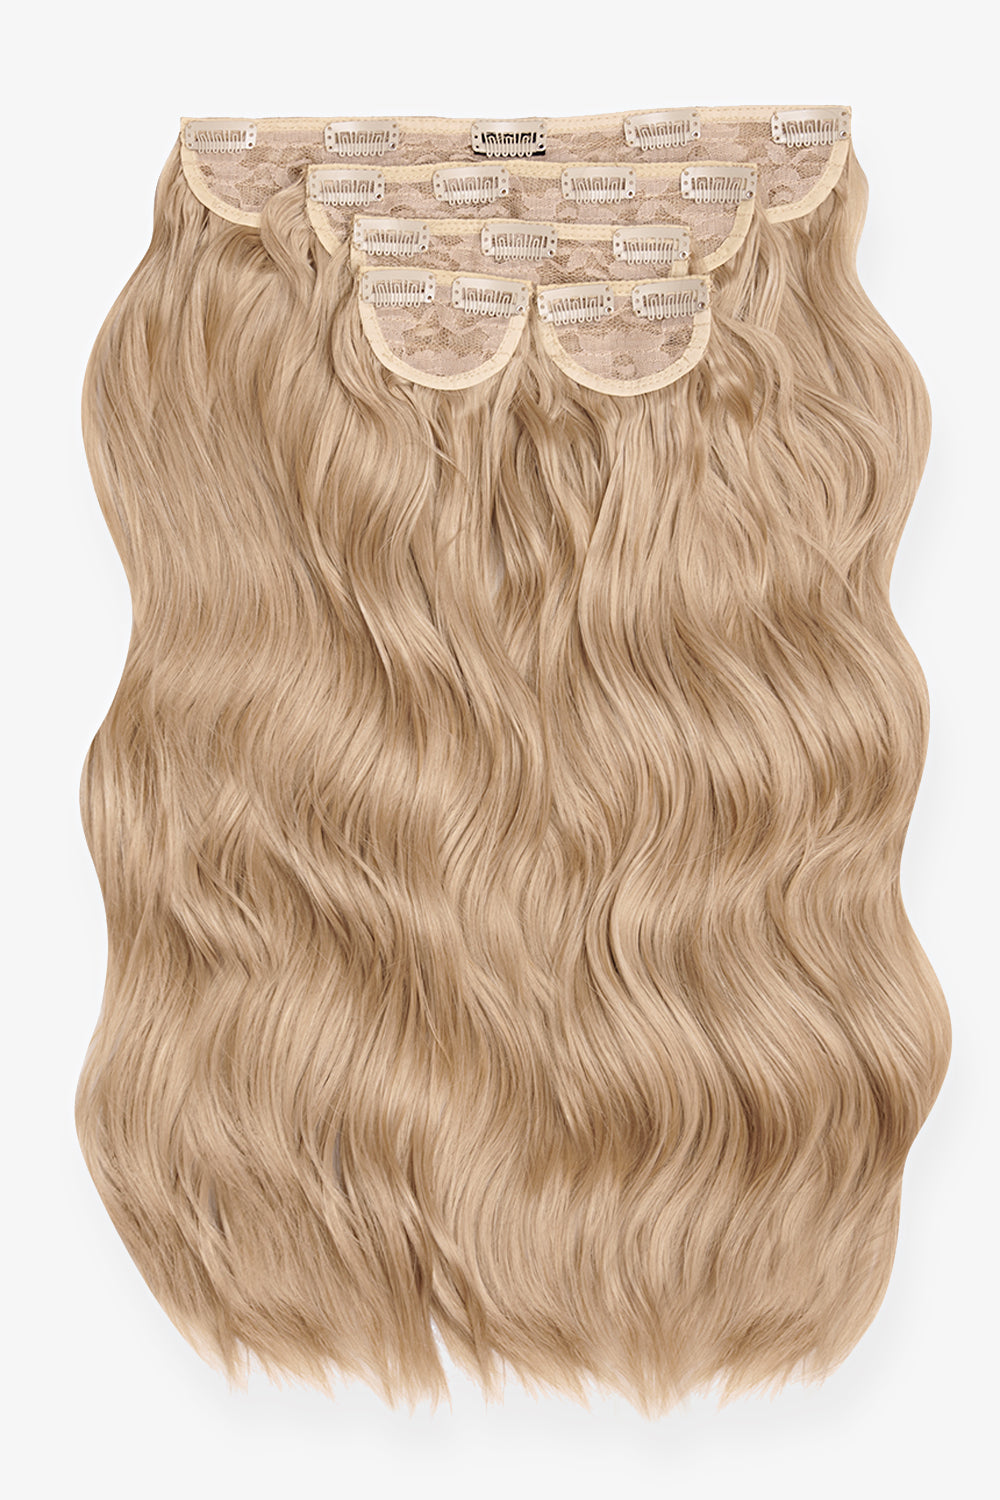 Super Thick 22" 5 Piece Brushed Out Wave Clip in Hair Extensions + Hair Care Bundle - Honey Blonde